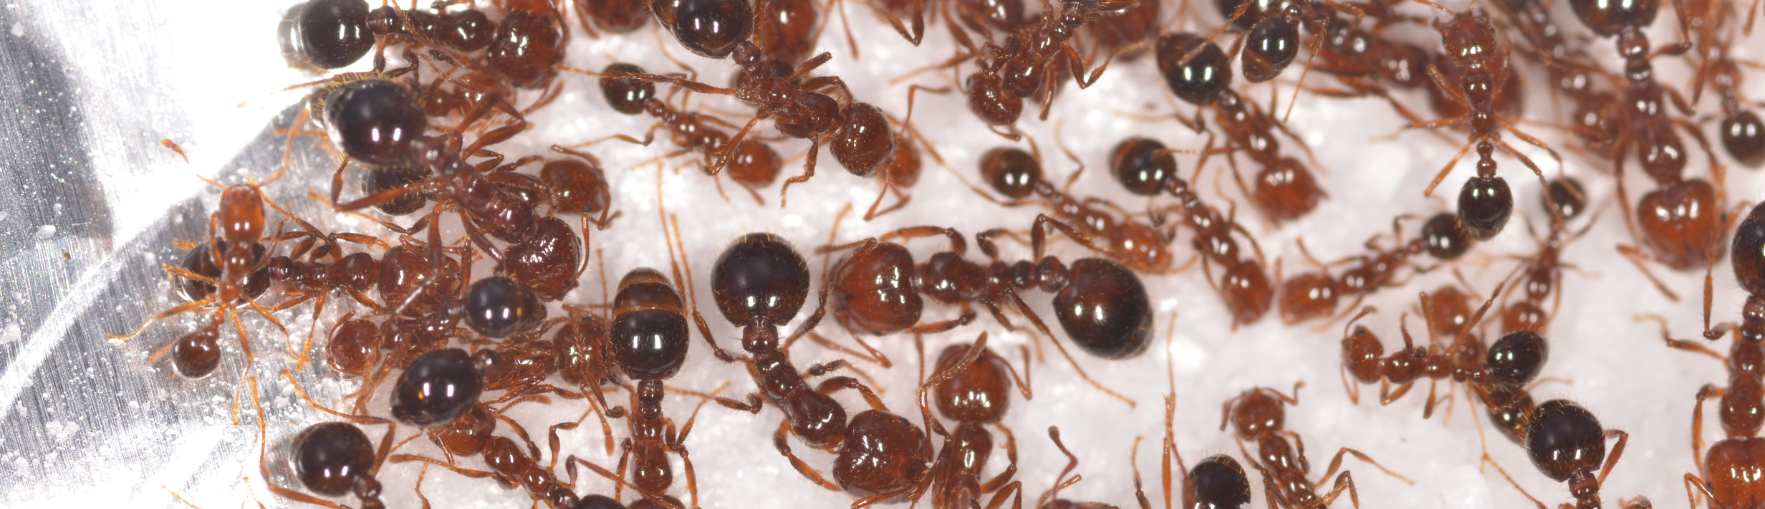 DIY Ant Traps and Killers That Really Work, According to Experts